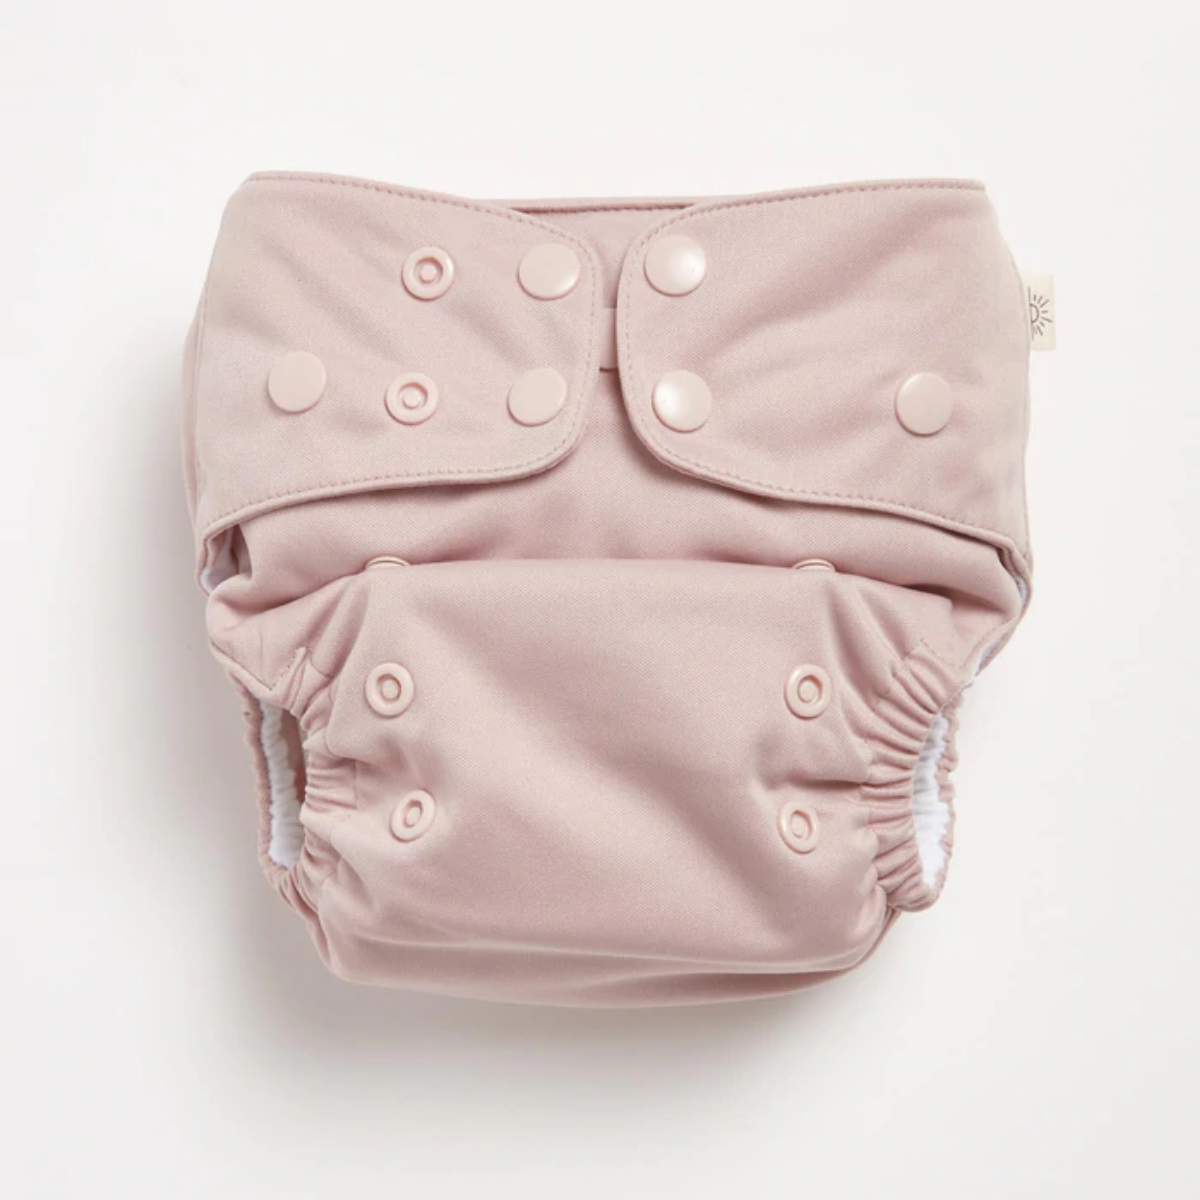 An EcoNaps Dusty Rose 2.0 Modern Cloth Nappy on a white background.